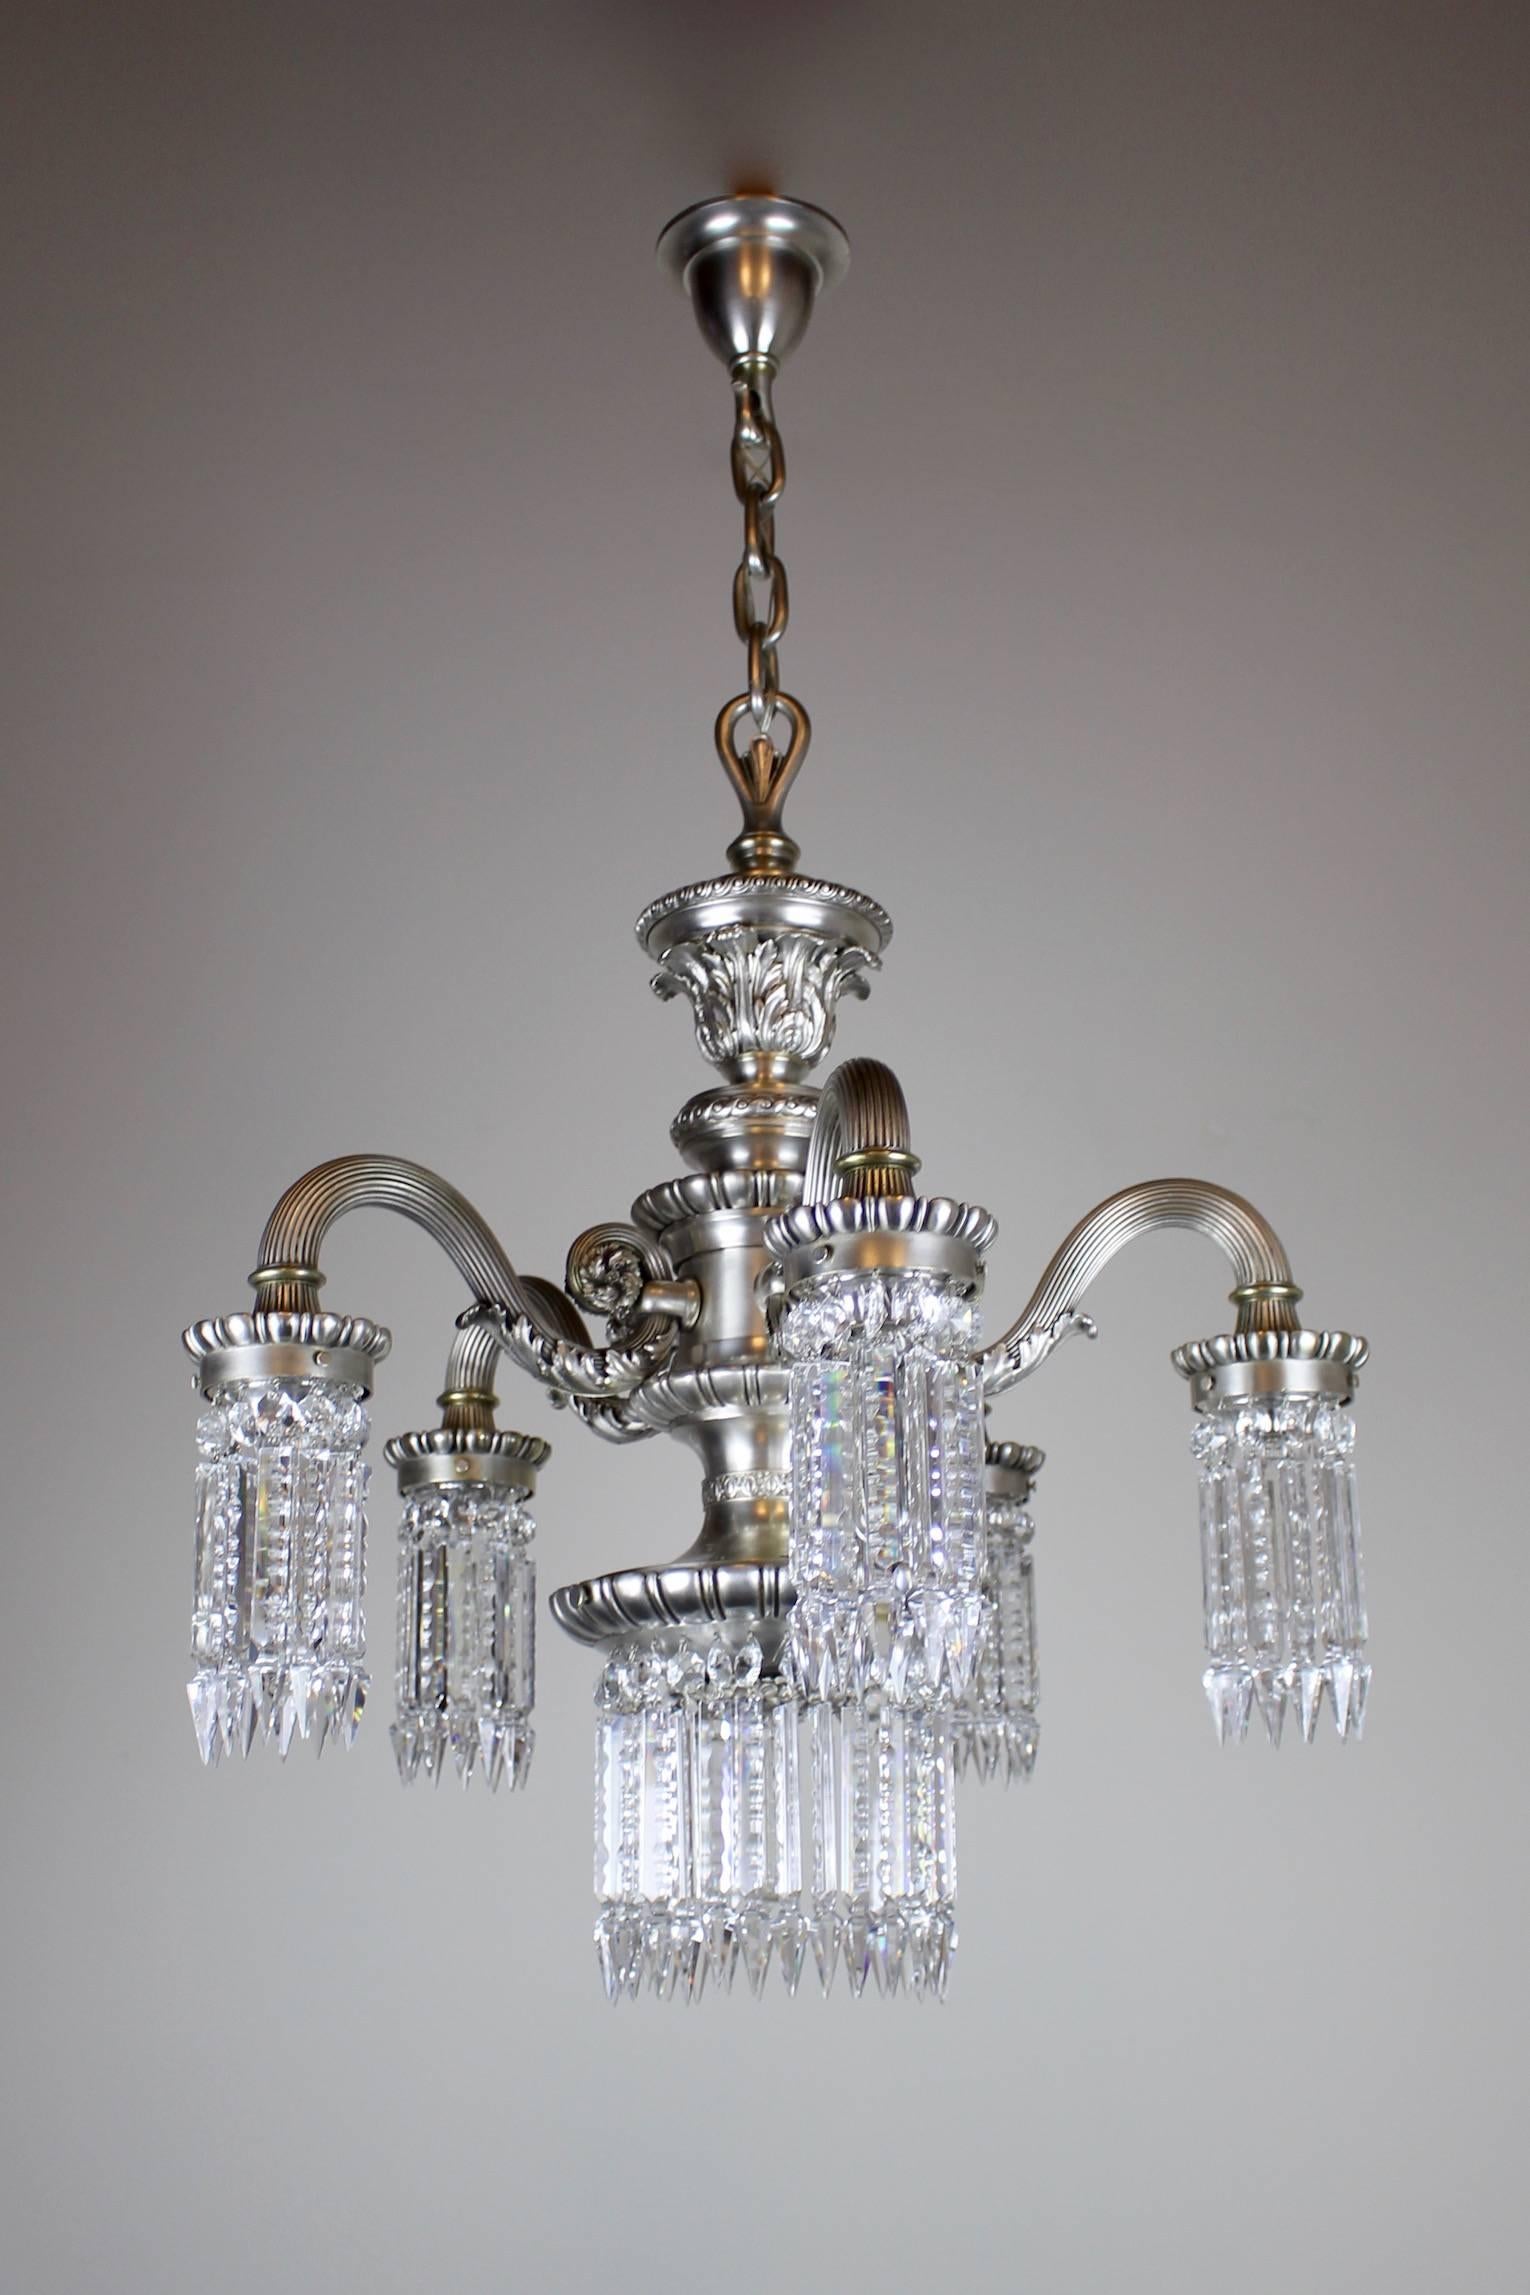 Neoclassical Silver Plate Crystal Chandelier In Excellent Condition For Sale In Vancouver, BC